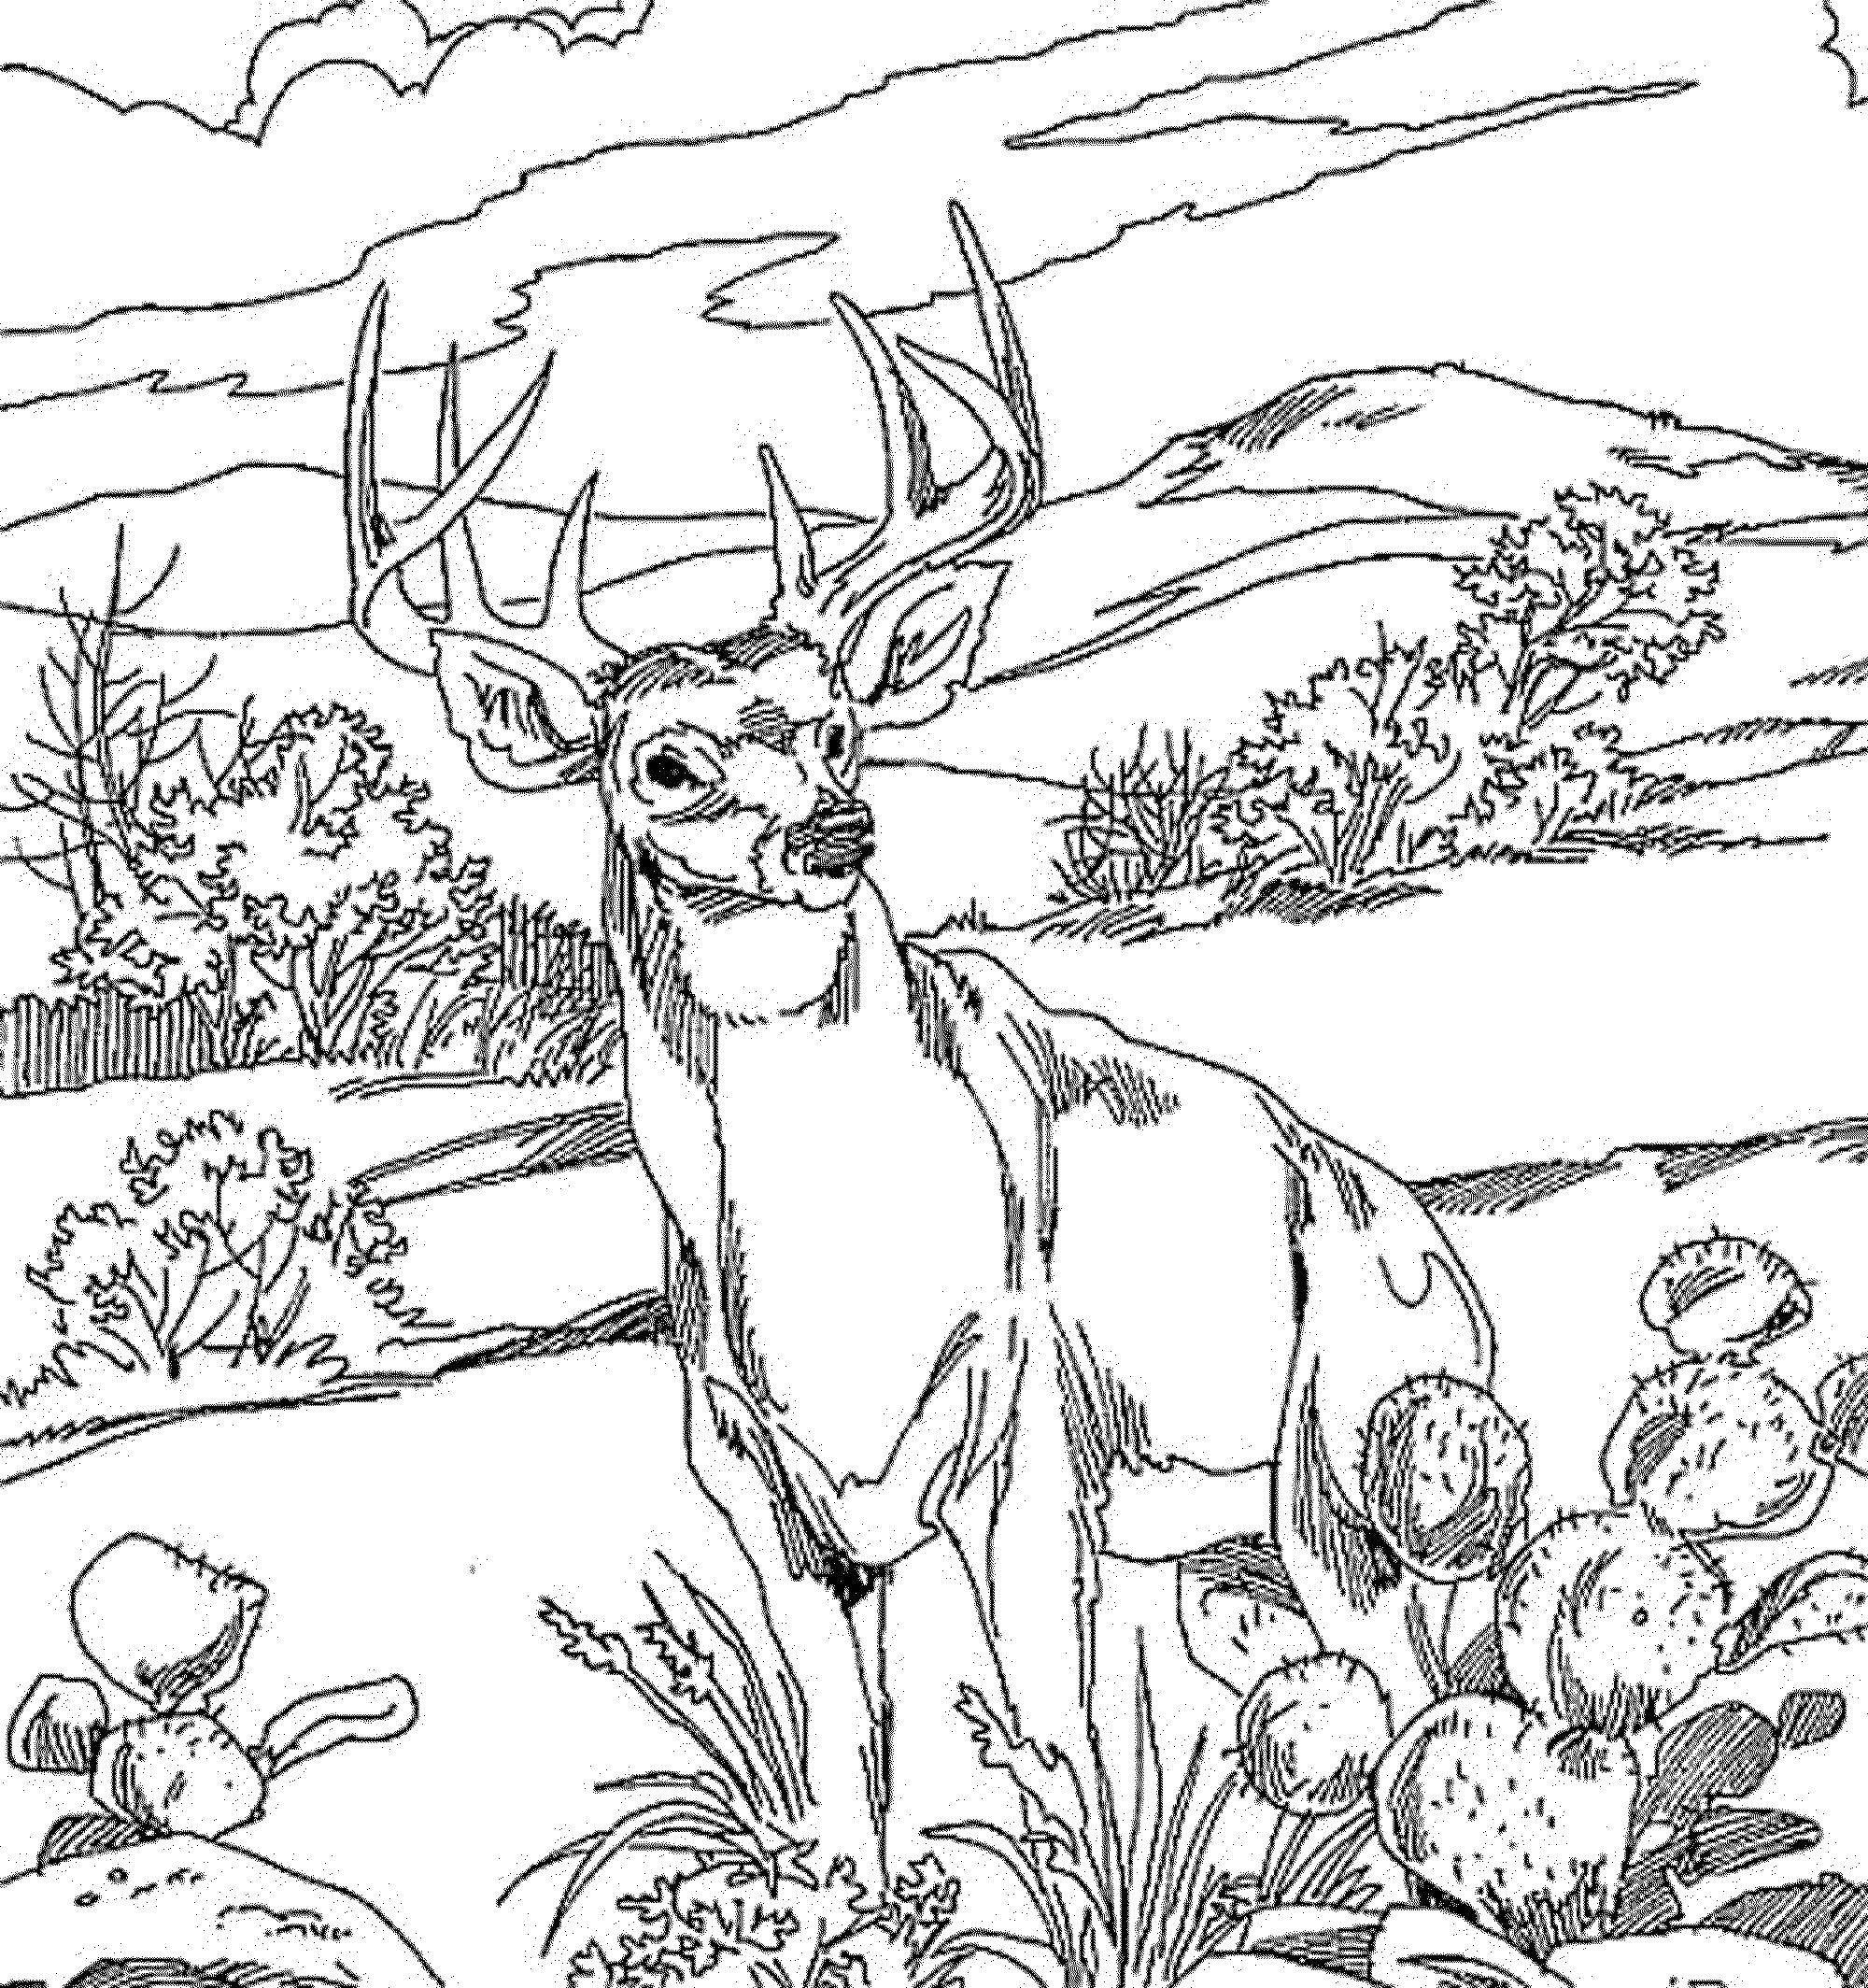 Coloring Deer. Category Animals. Tags:  The deer.